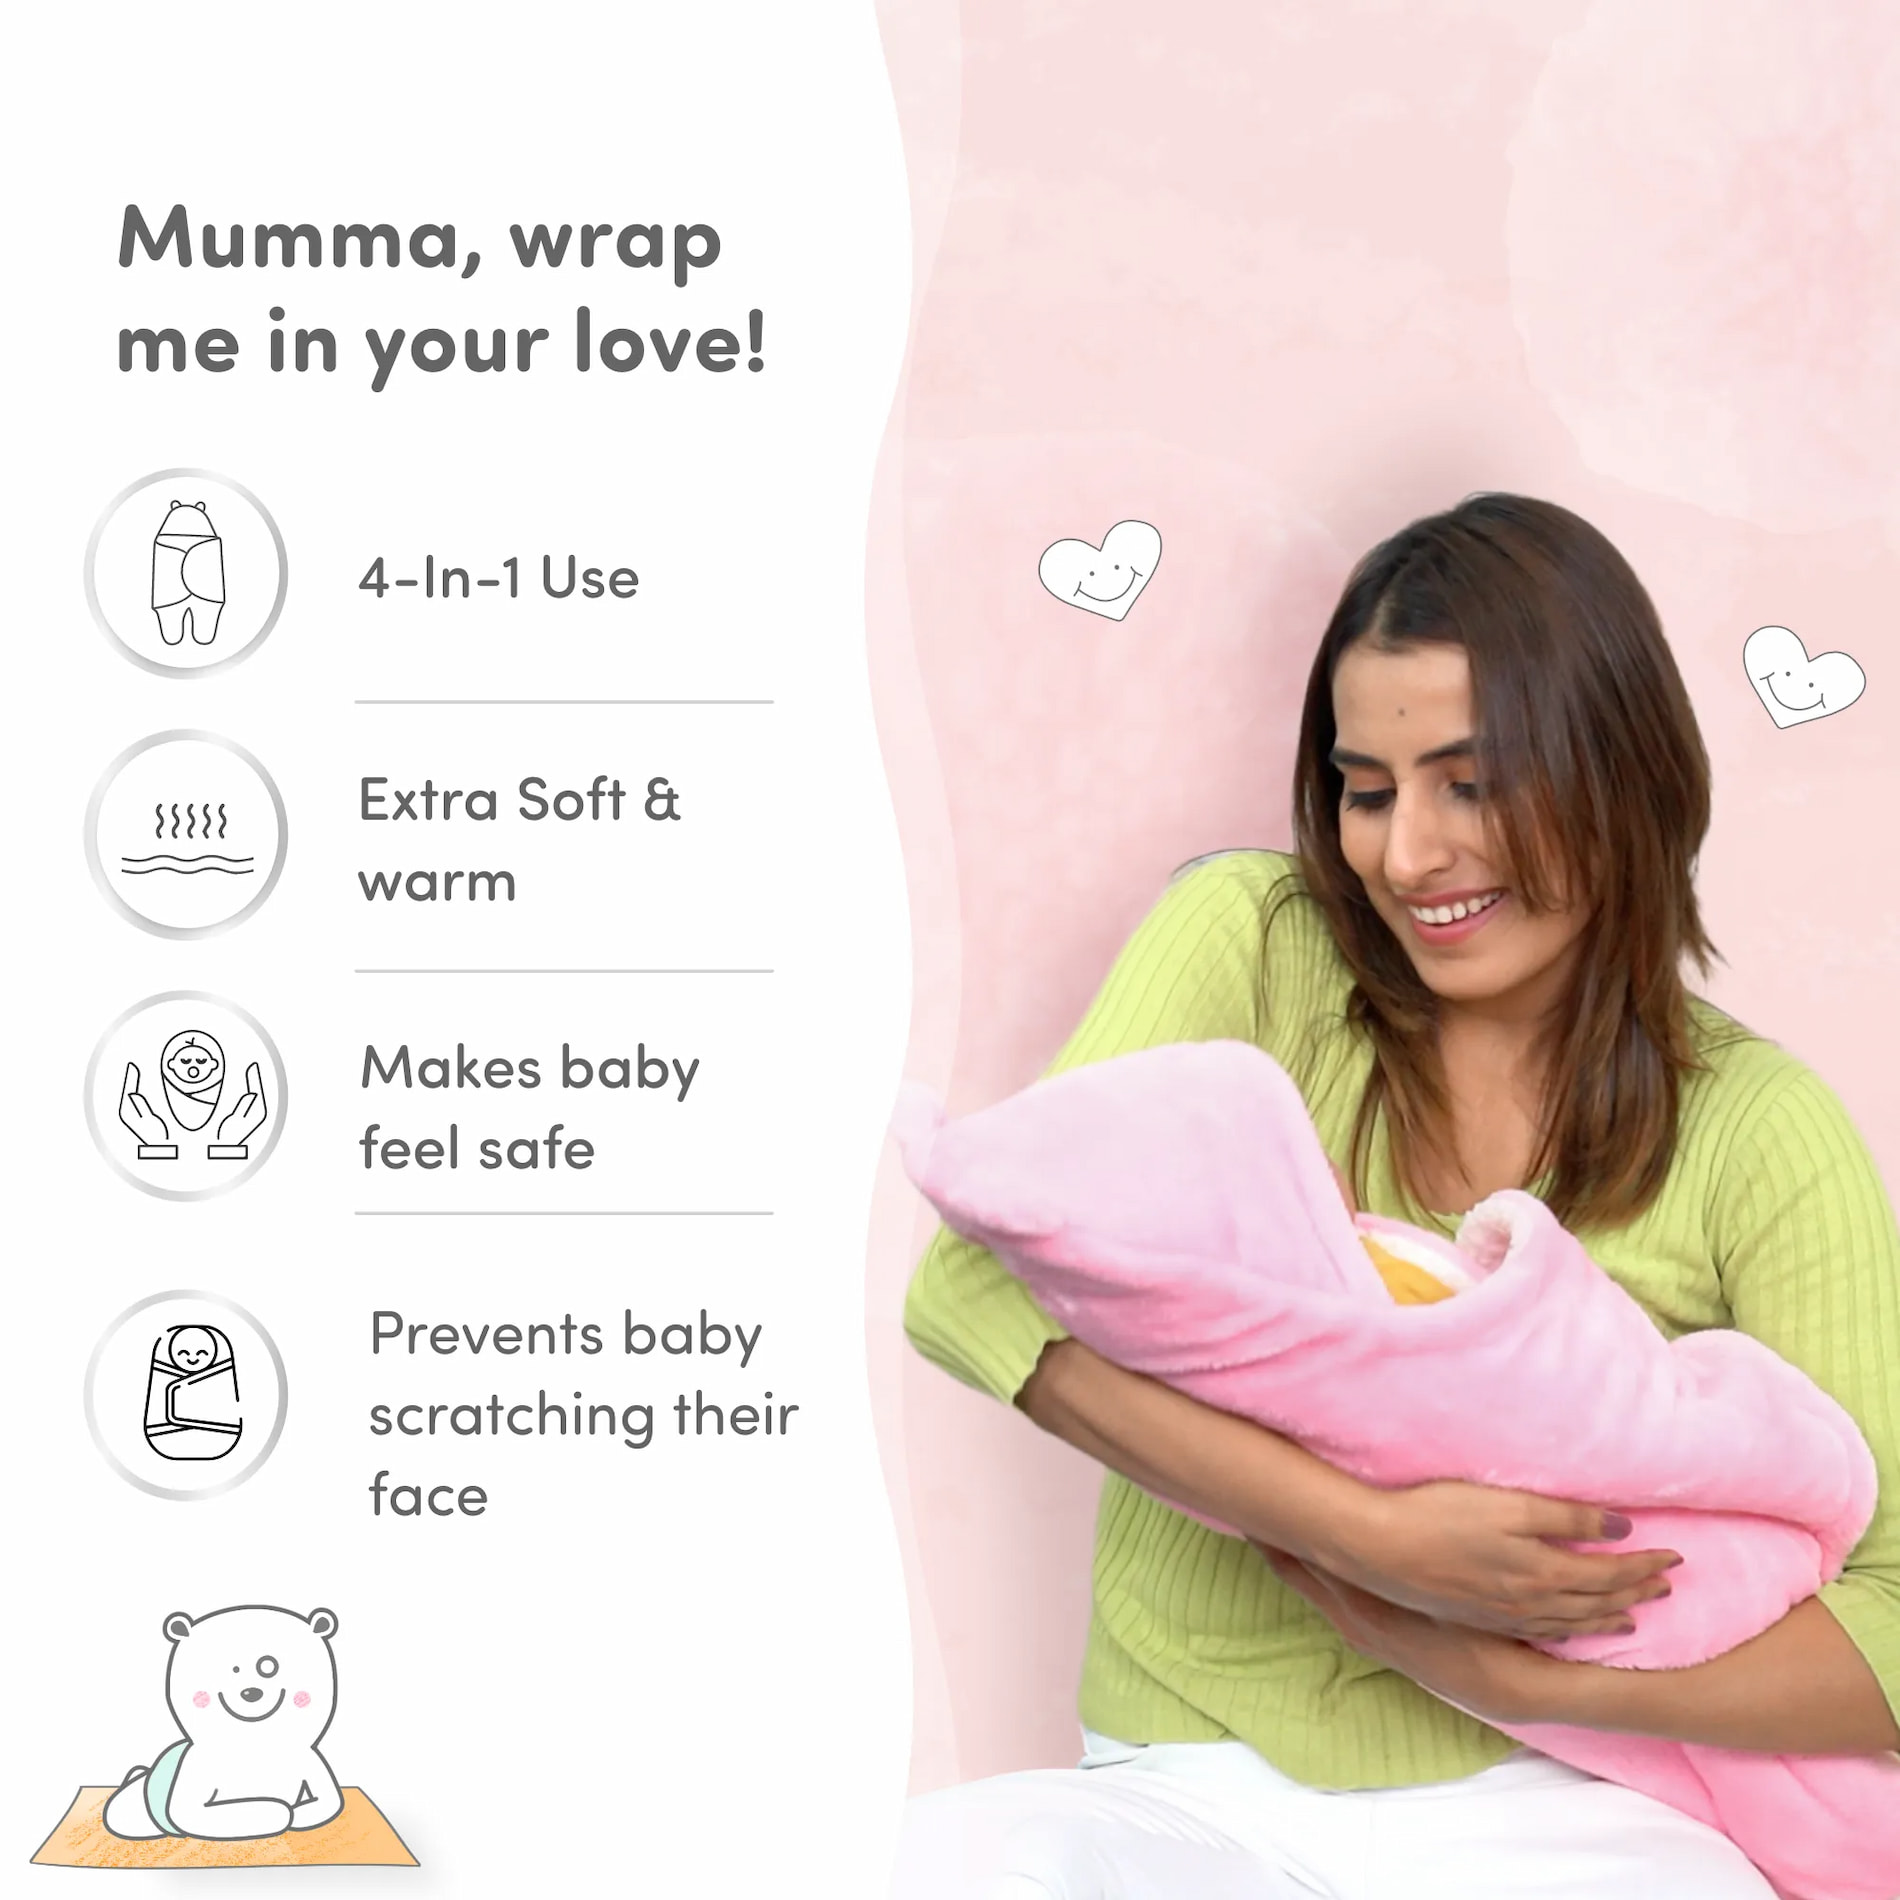 Baby Wrapper for New Born | Baby Swaddling Wrapper | 4-in-1 All Season AC Blanket cum Sleeping Bag for Baby 0-6 Months - Light Pink & Mint Green